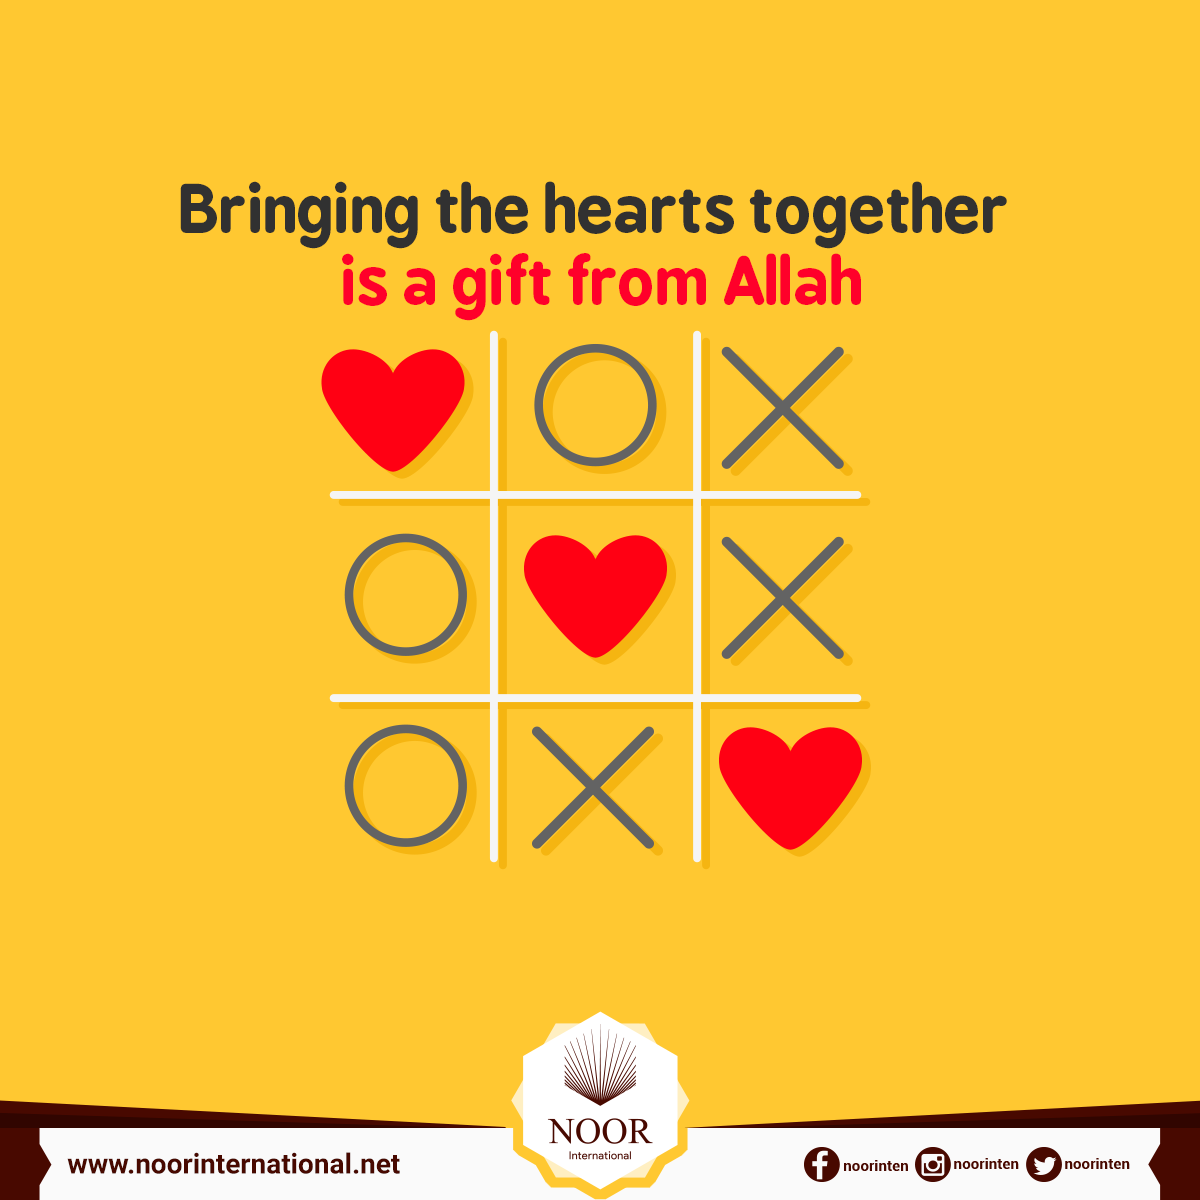 Bringing the hearts together is a gift from Allah